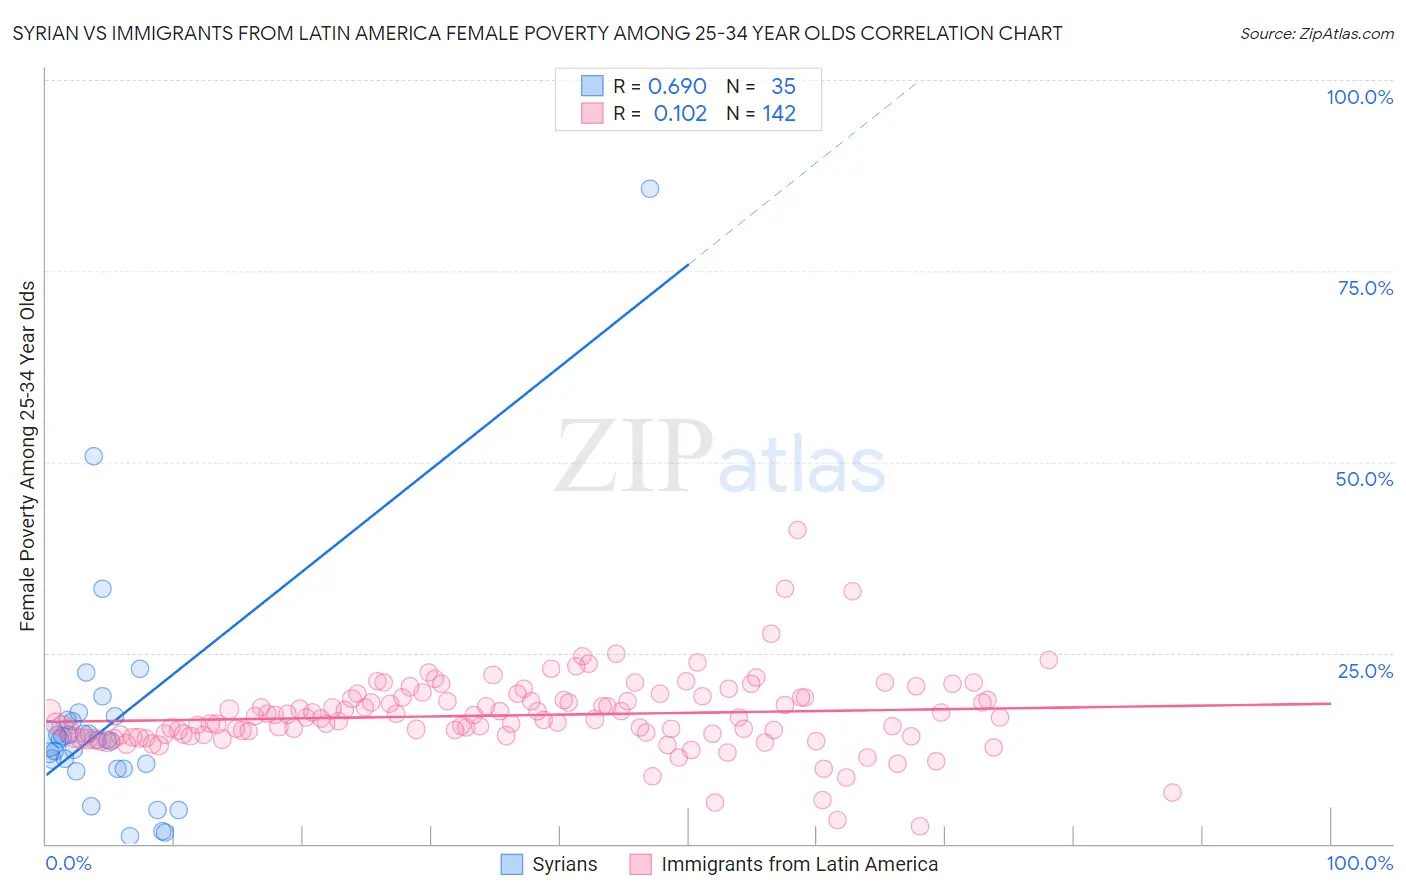 Syrian vs Immigrants from Latin America Female Poverty Among 25-34 Year Olds